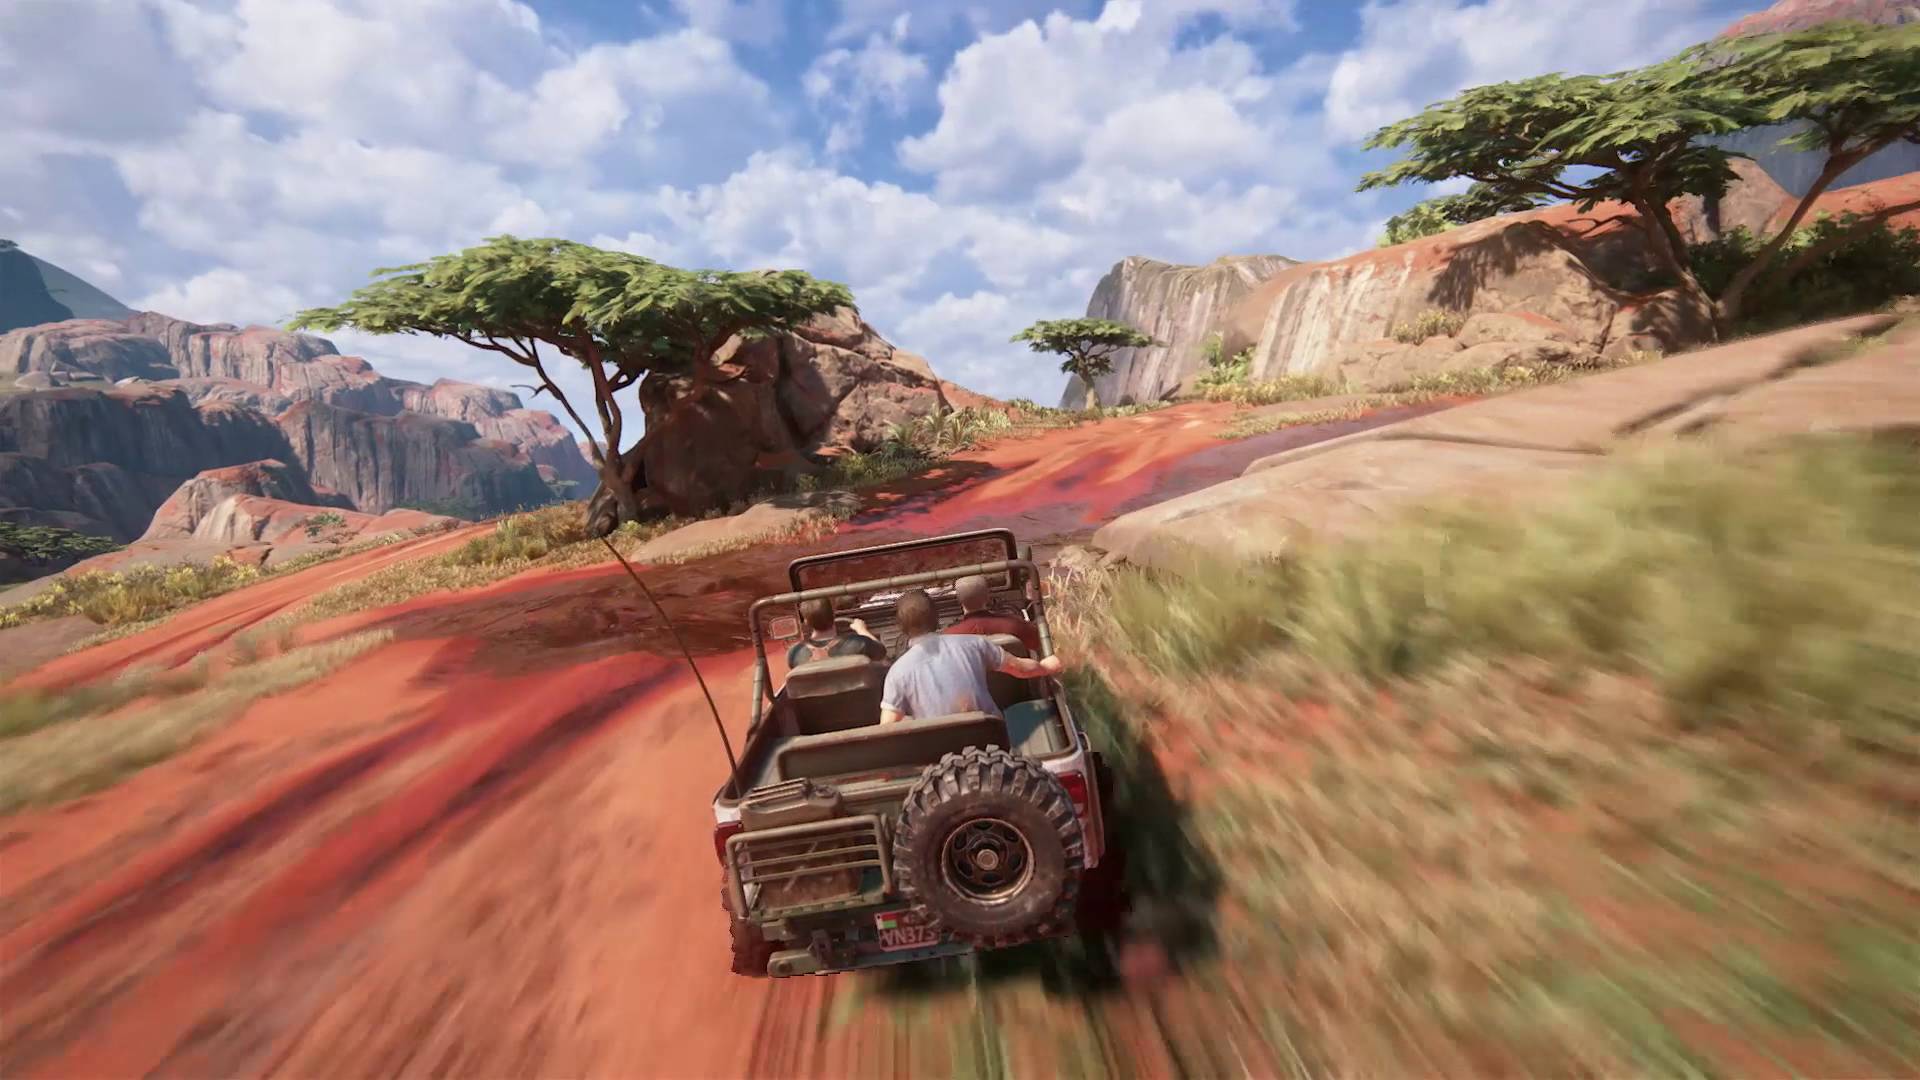 Uncharted 4 | Hands-on with Nathan Drake in Madagascar